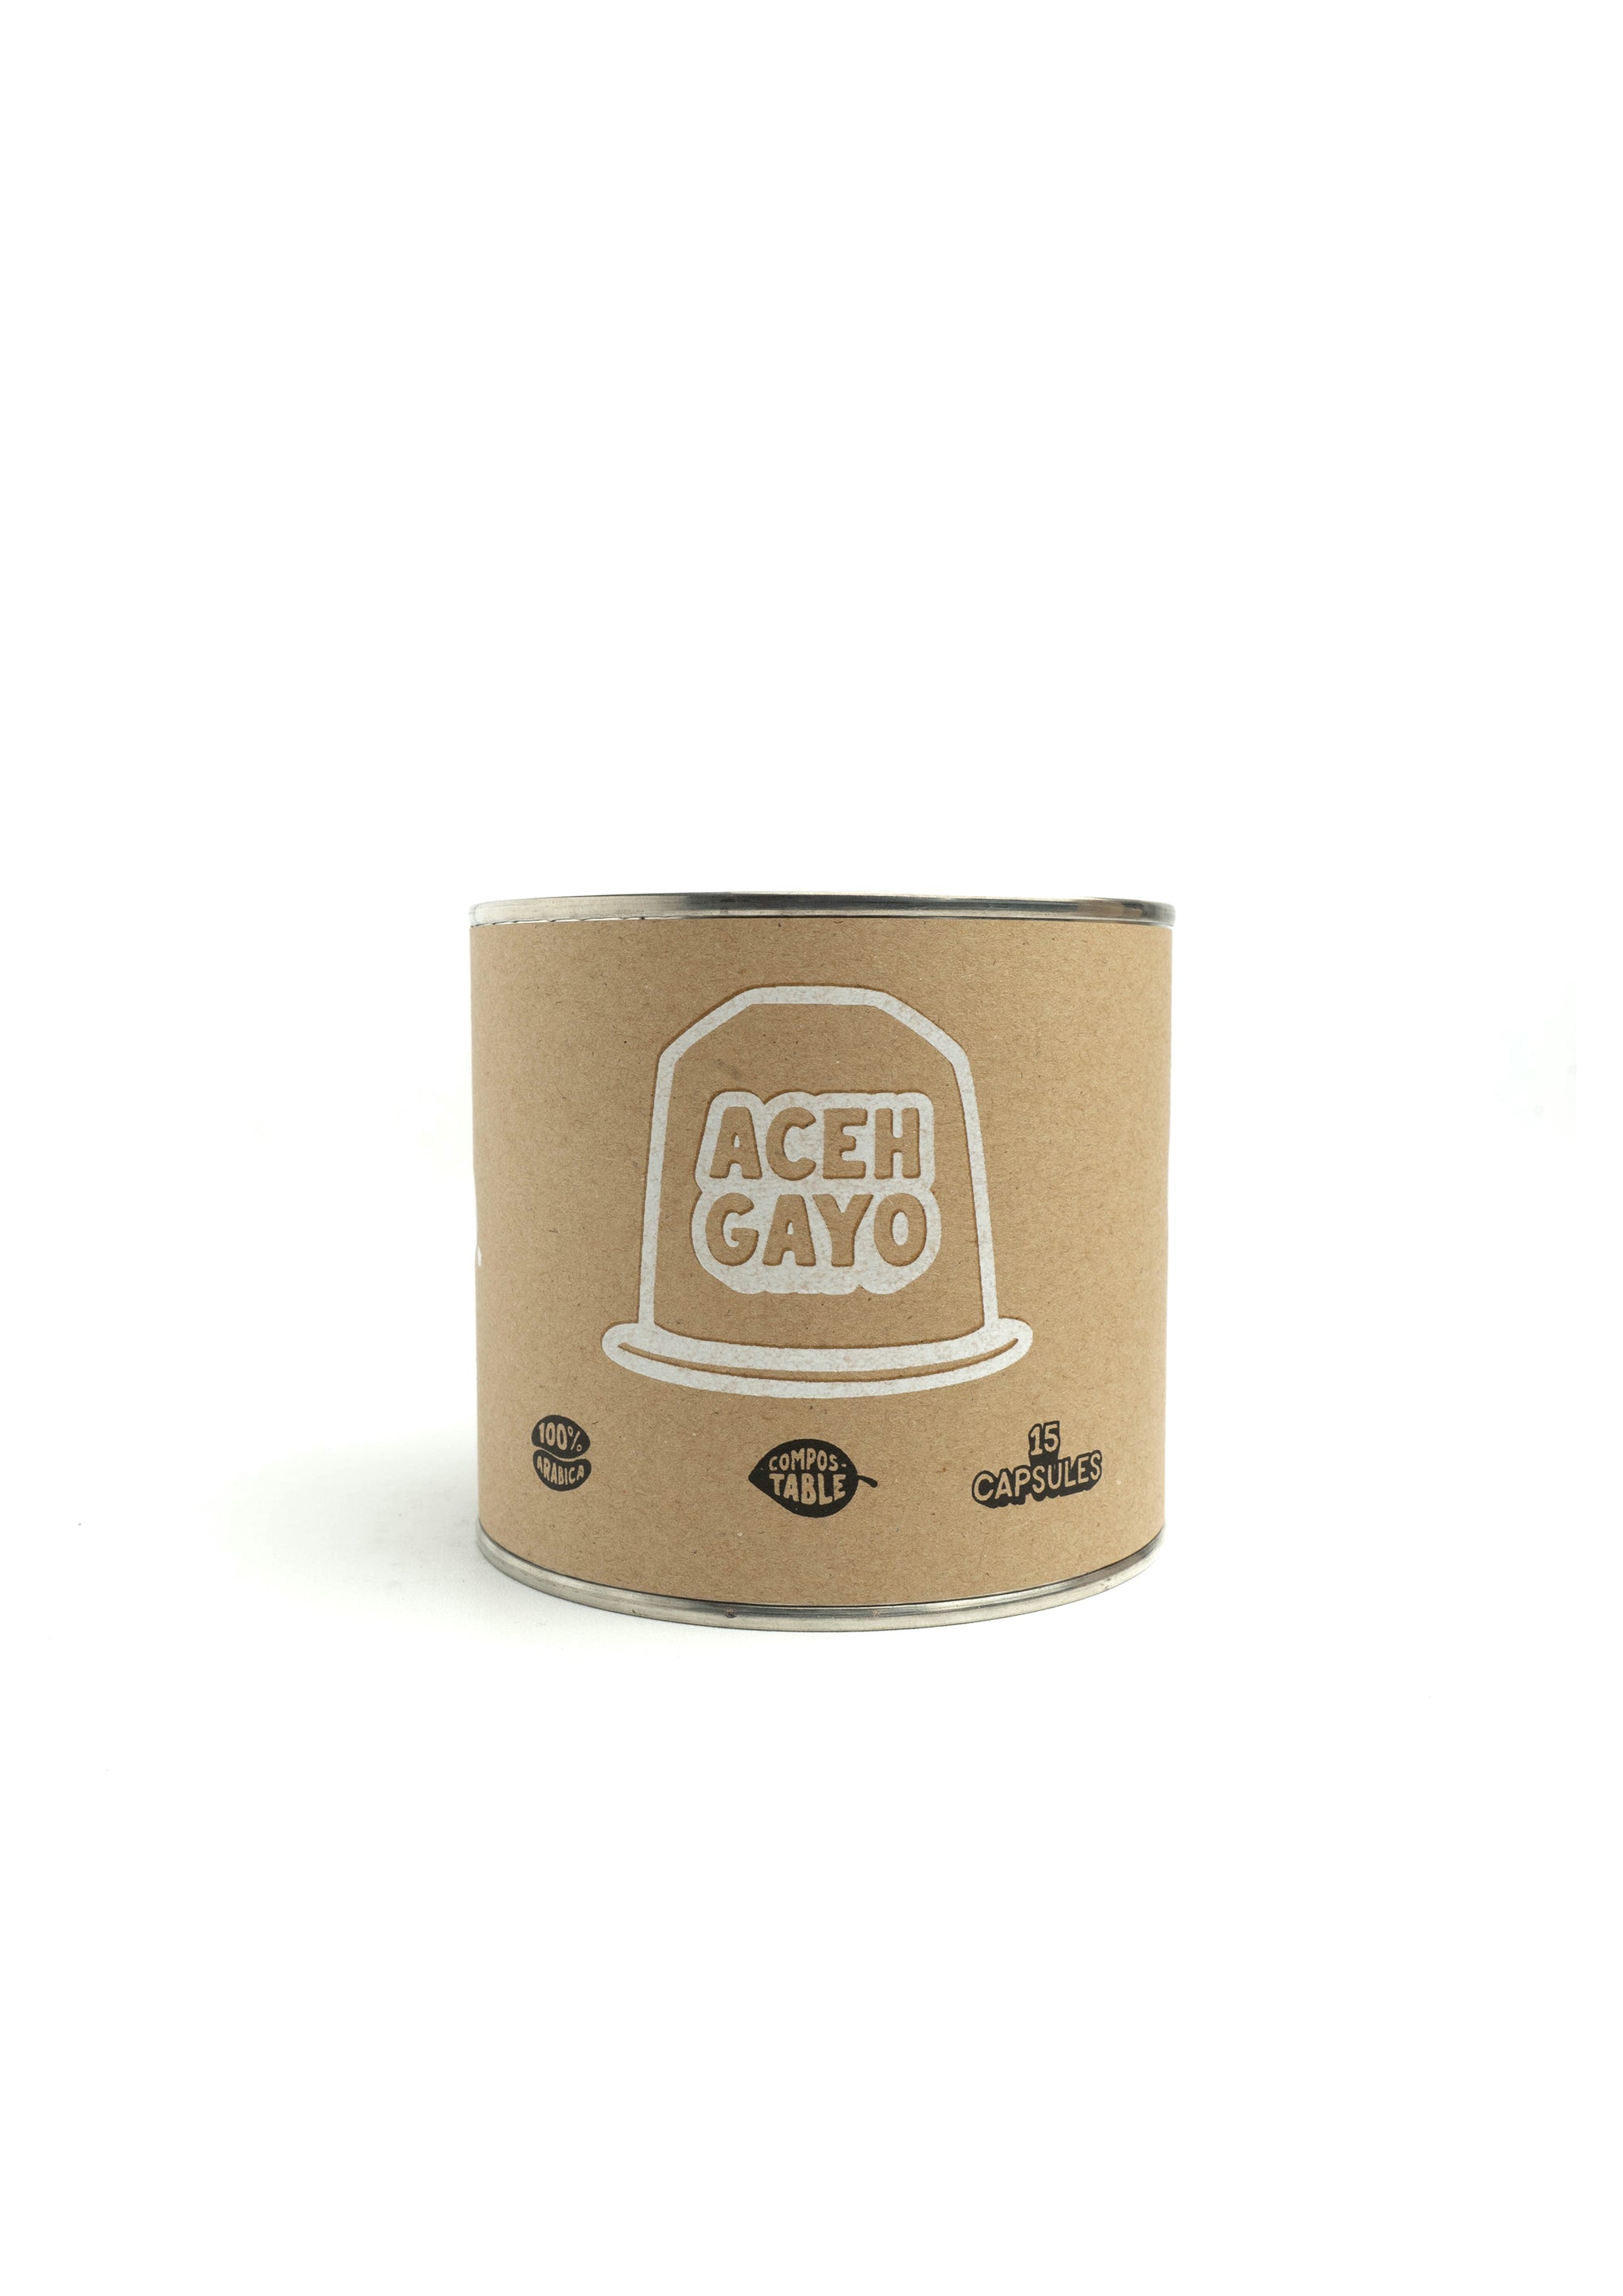 Aceh Gayo Coffee Pods